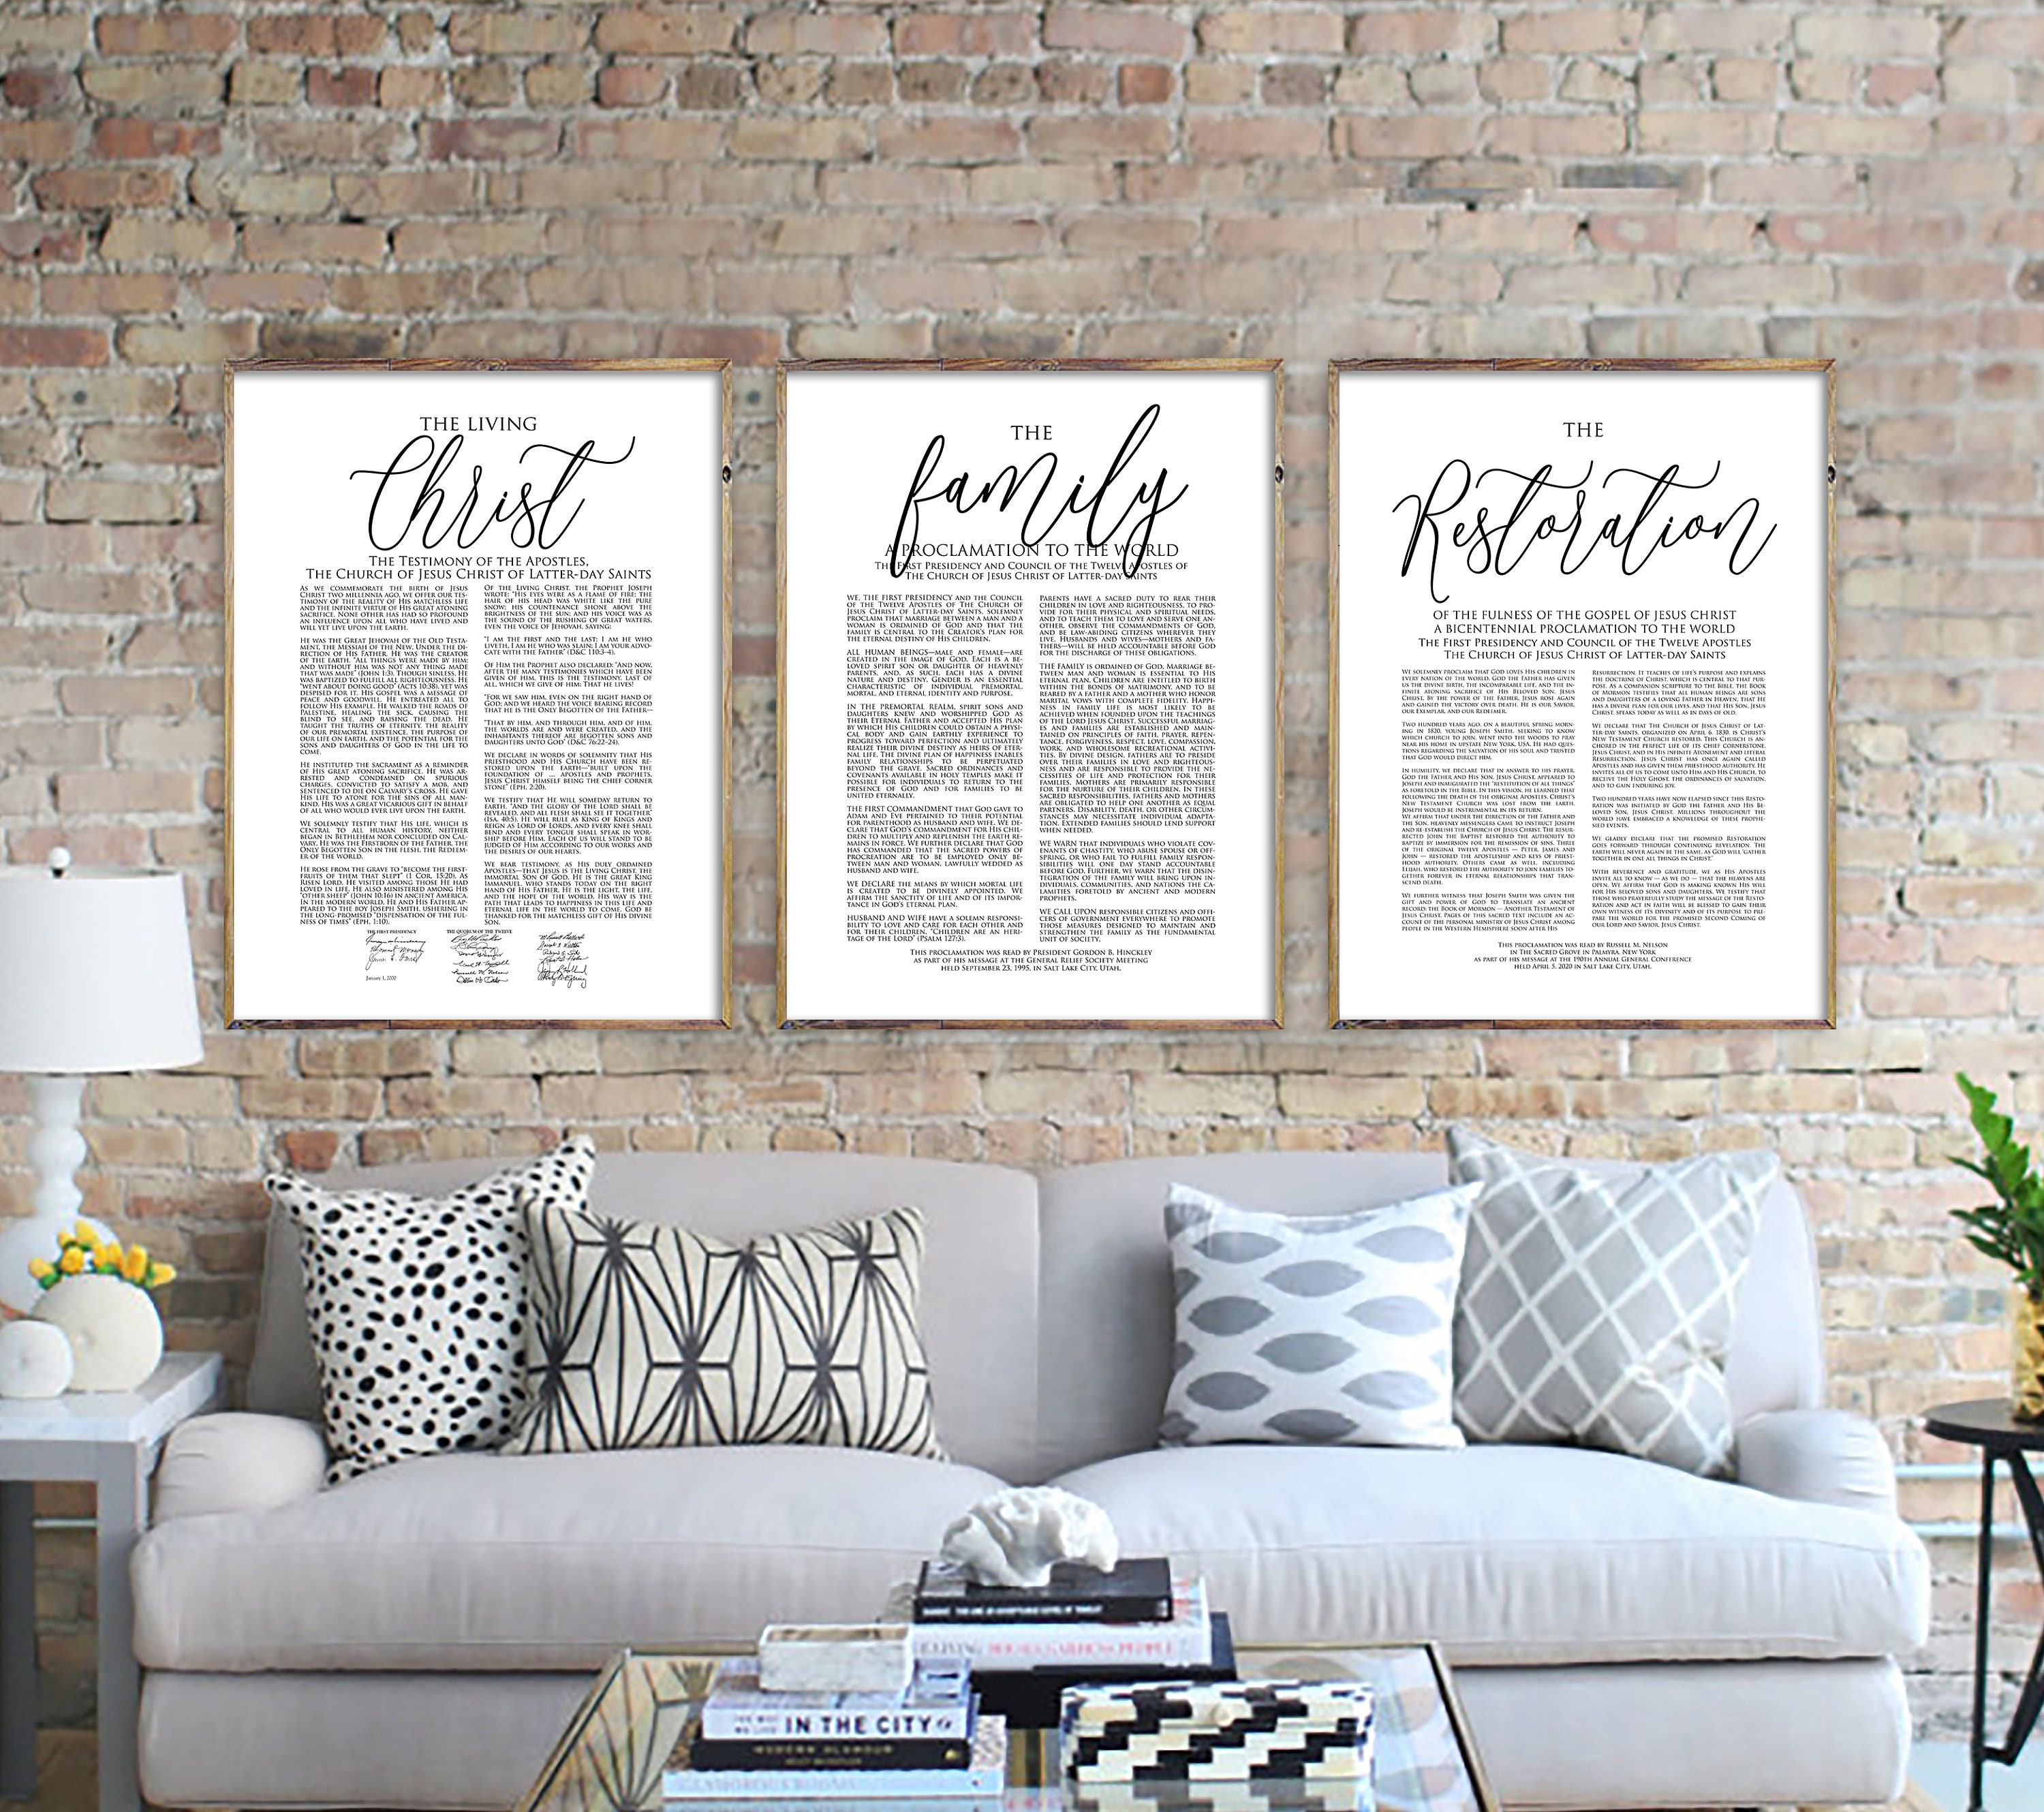 Restoration Proclamation Living Christ Church of Jesus Christ 3 LDS Printables Calligraphy LDS Wall Art Family Proclamation